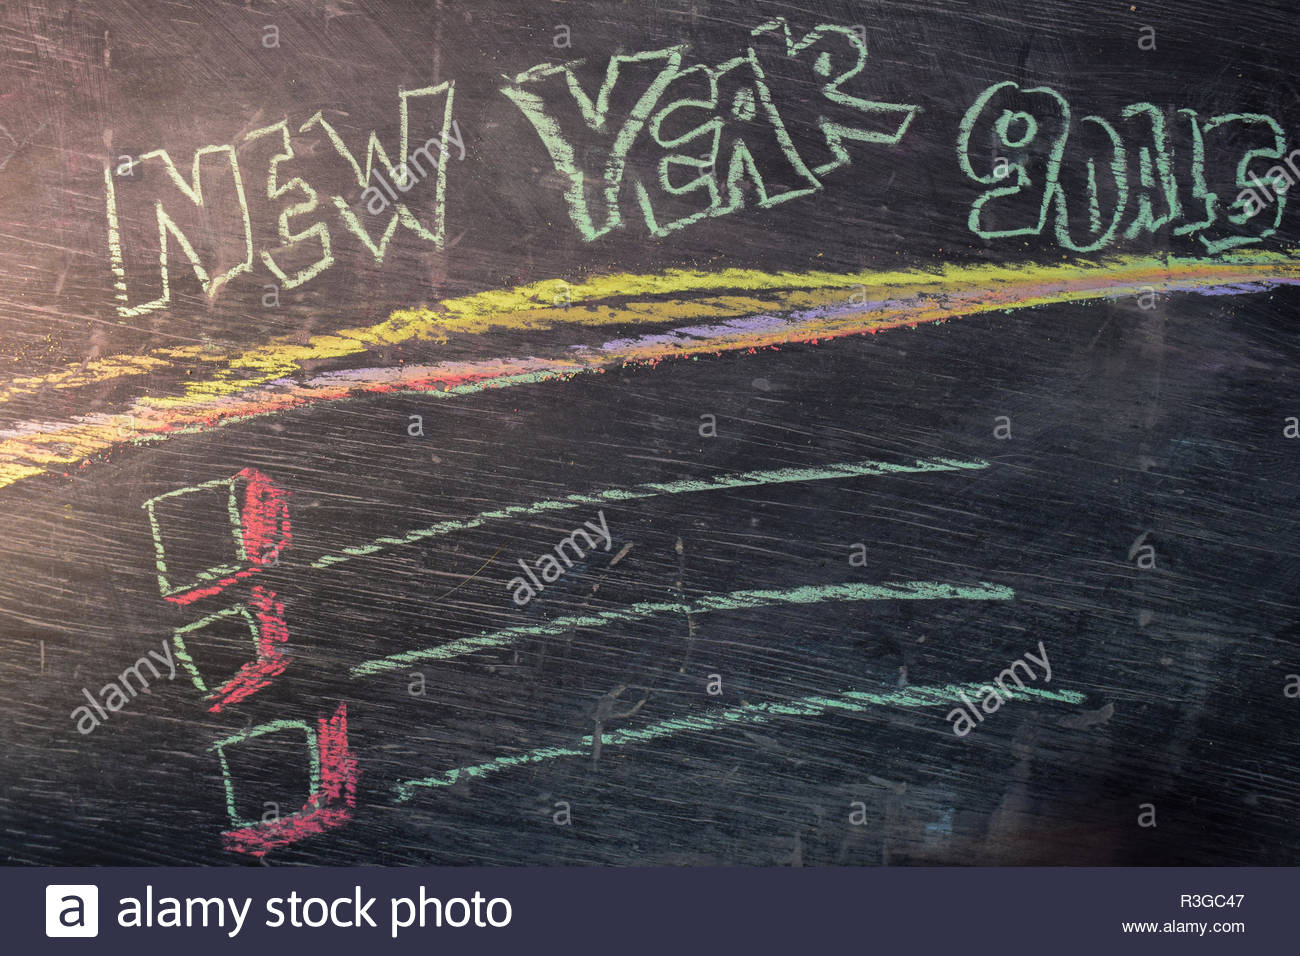 New Year Goals Handwritten Text With Colorful Chalk On Blackboard